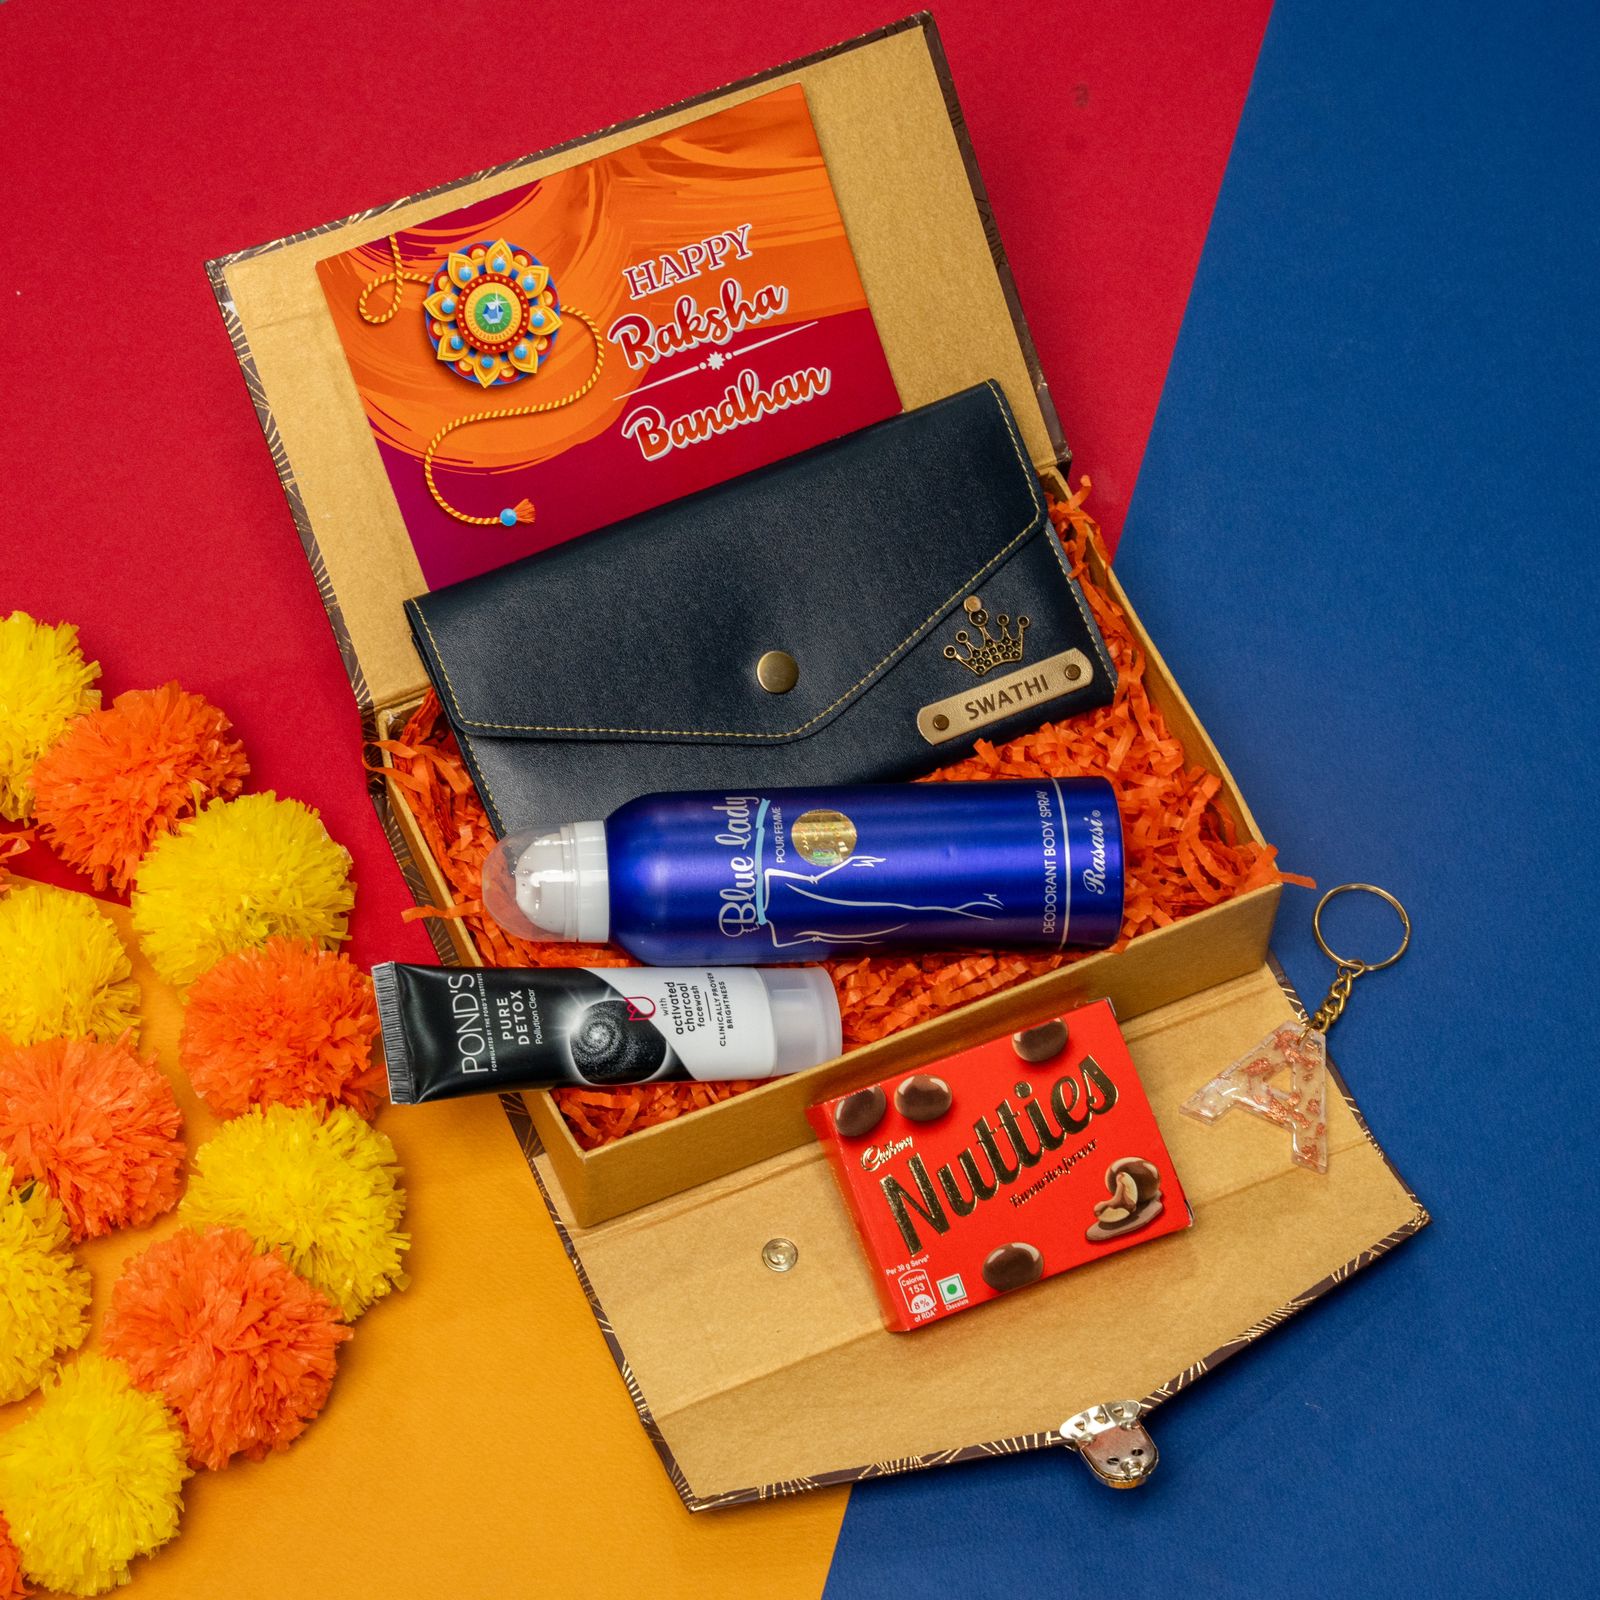 Oye Happy - Best Combos & Hampers (Mugs, Rakhis & Cards) - Best Gifts for  Brother/Bhai/Sister/Behen on Rakshabandhan (Bro Hamper) : Amazon.in: Office  Products